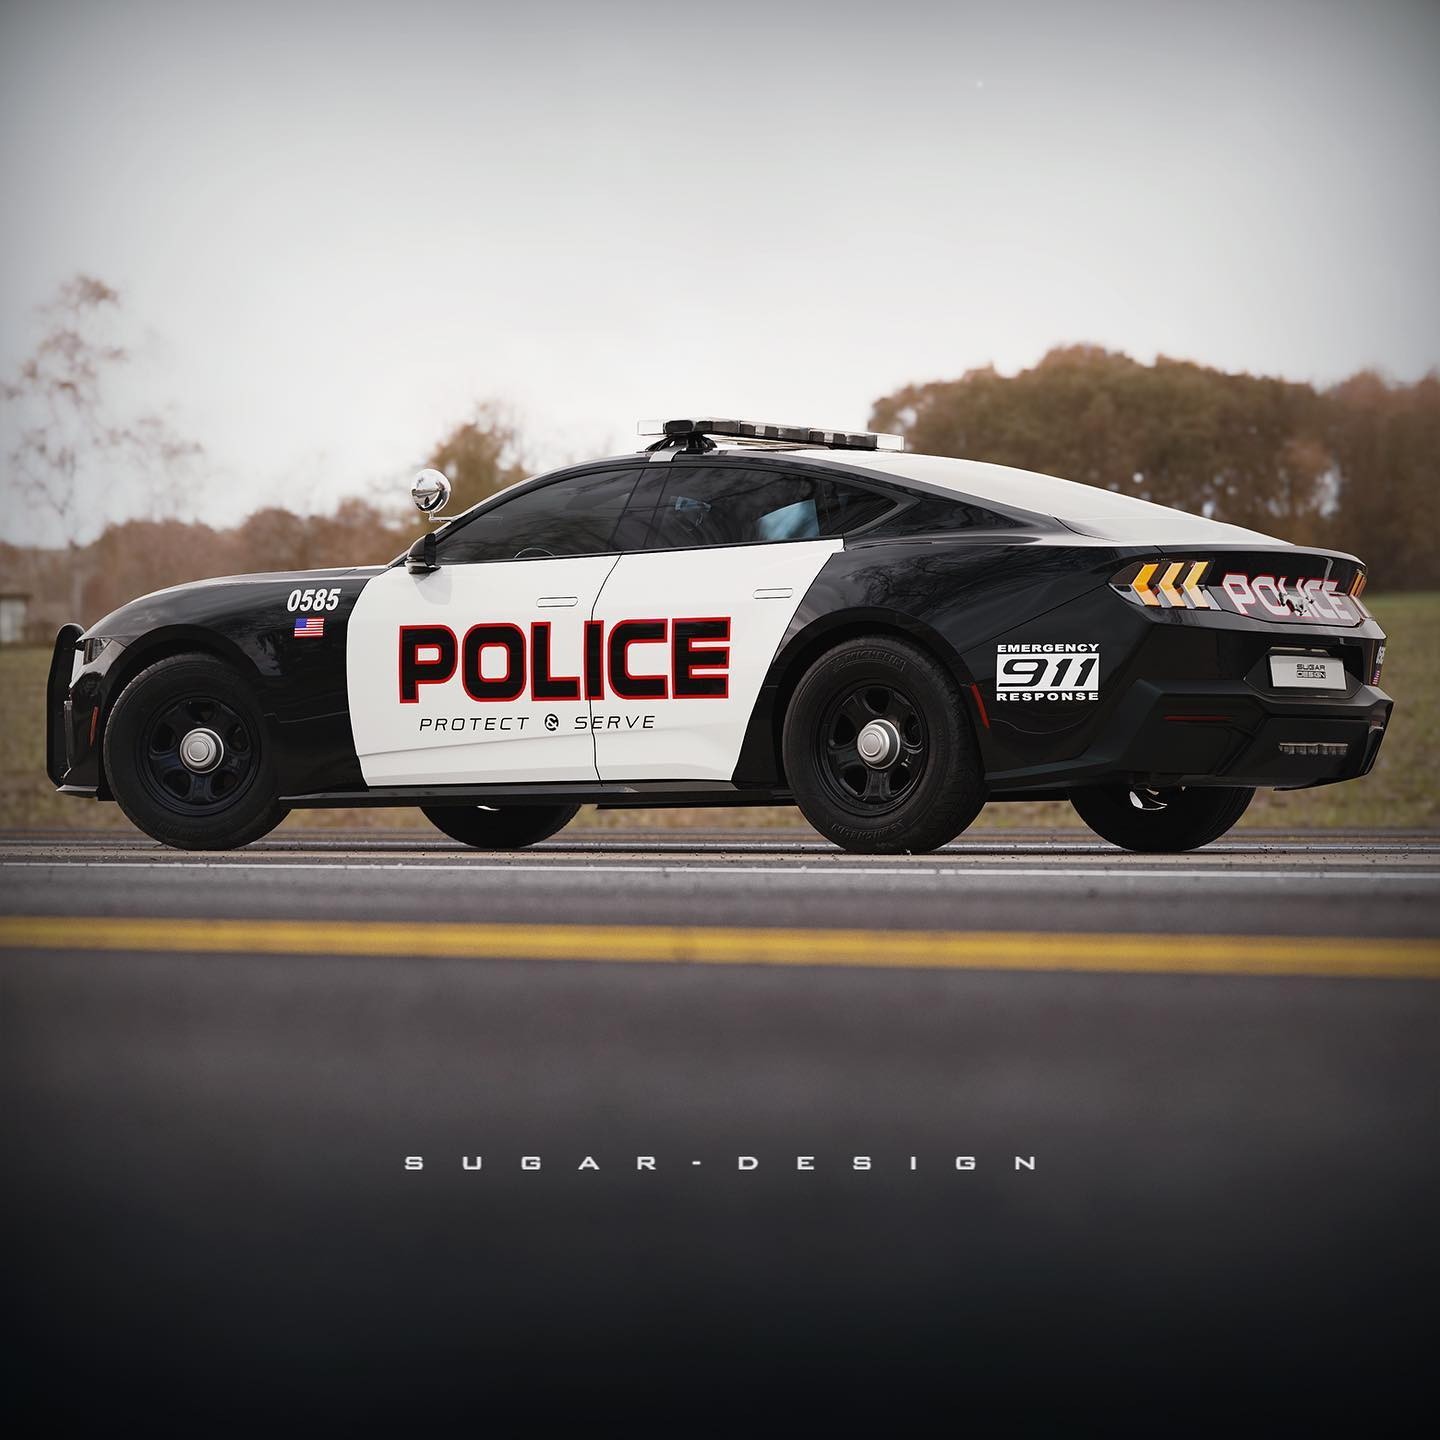 2024 Ford Mustang Sedan Imagined As Police Cruiser, Is It a Modern